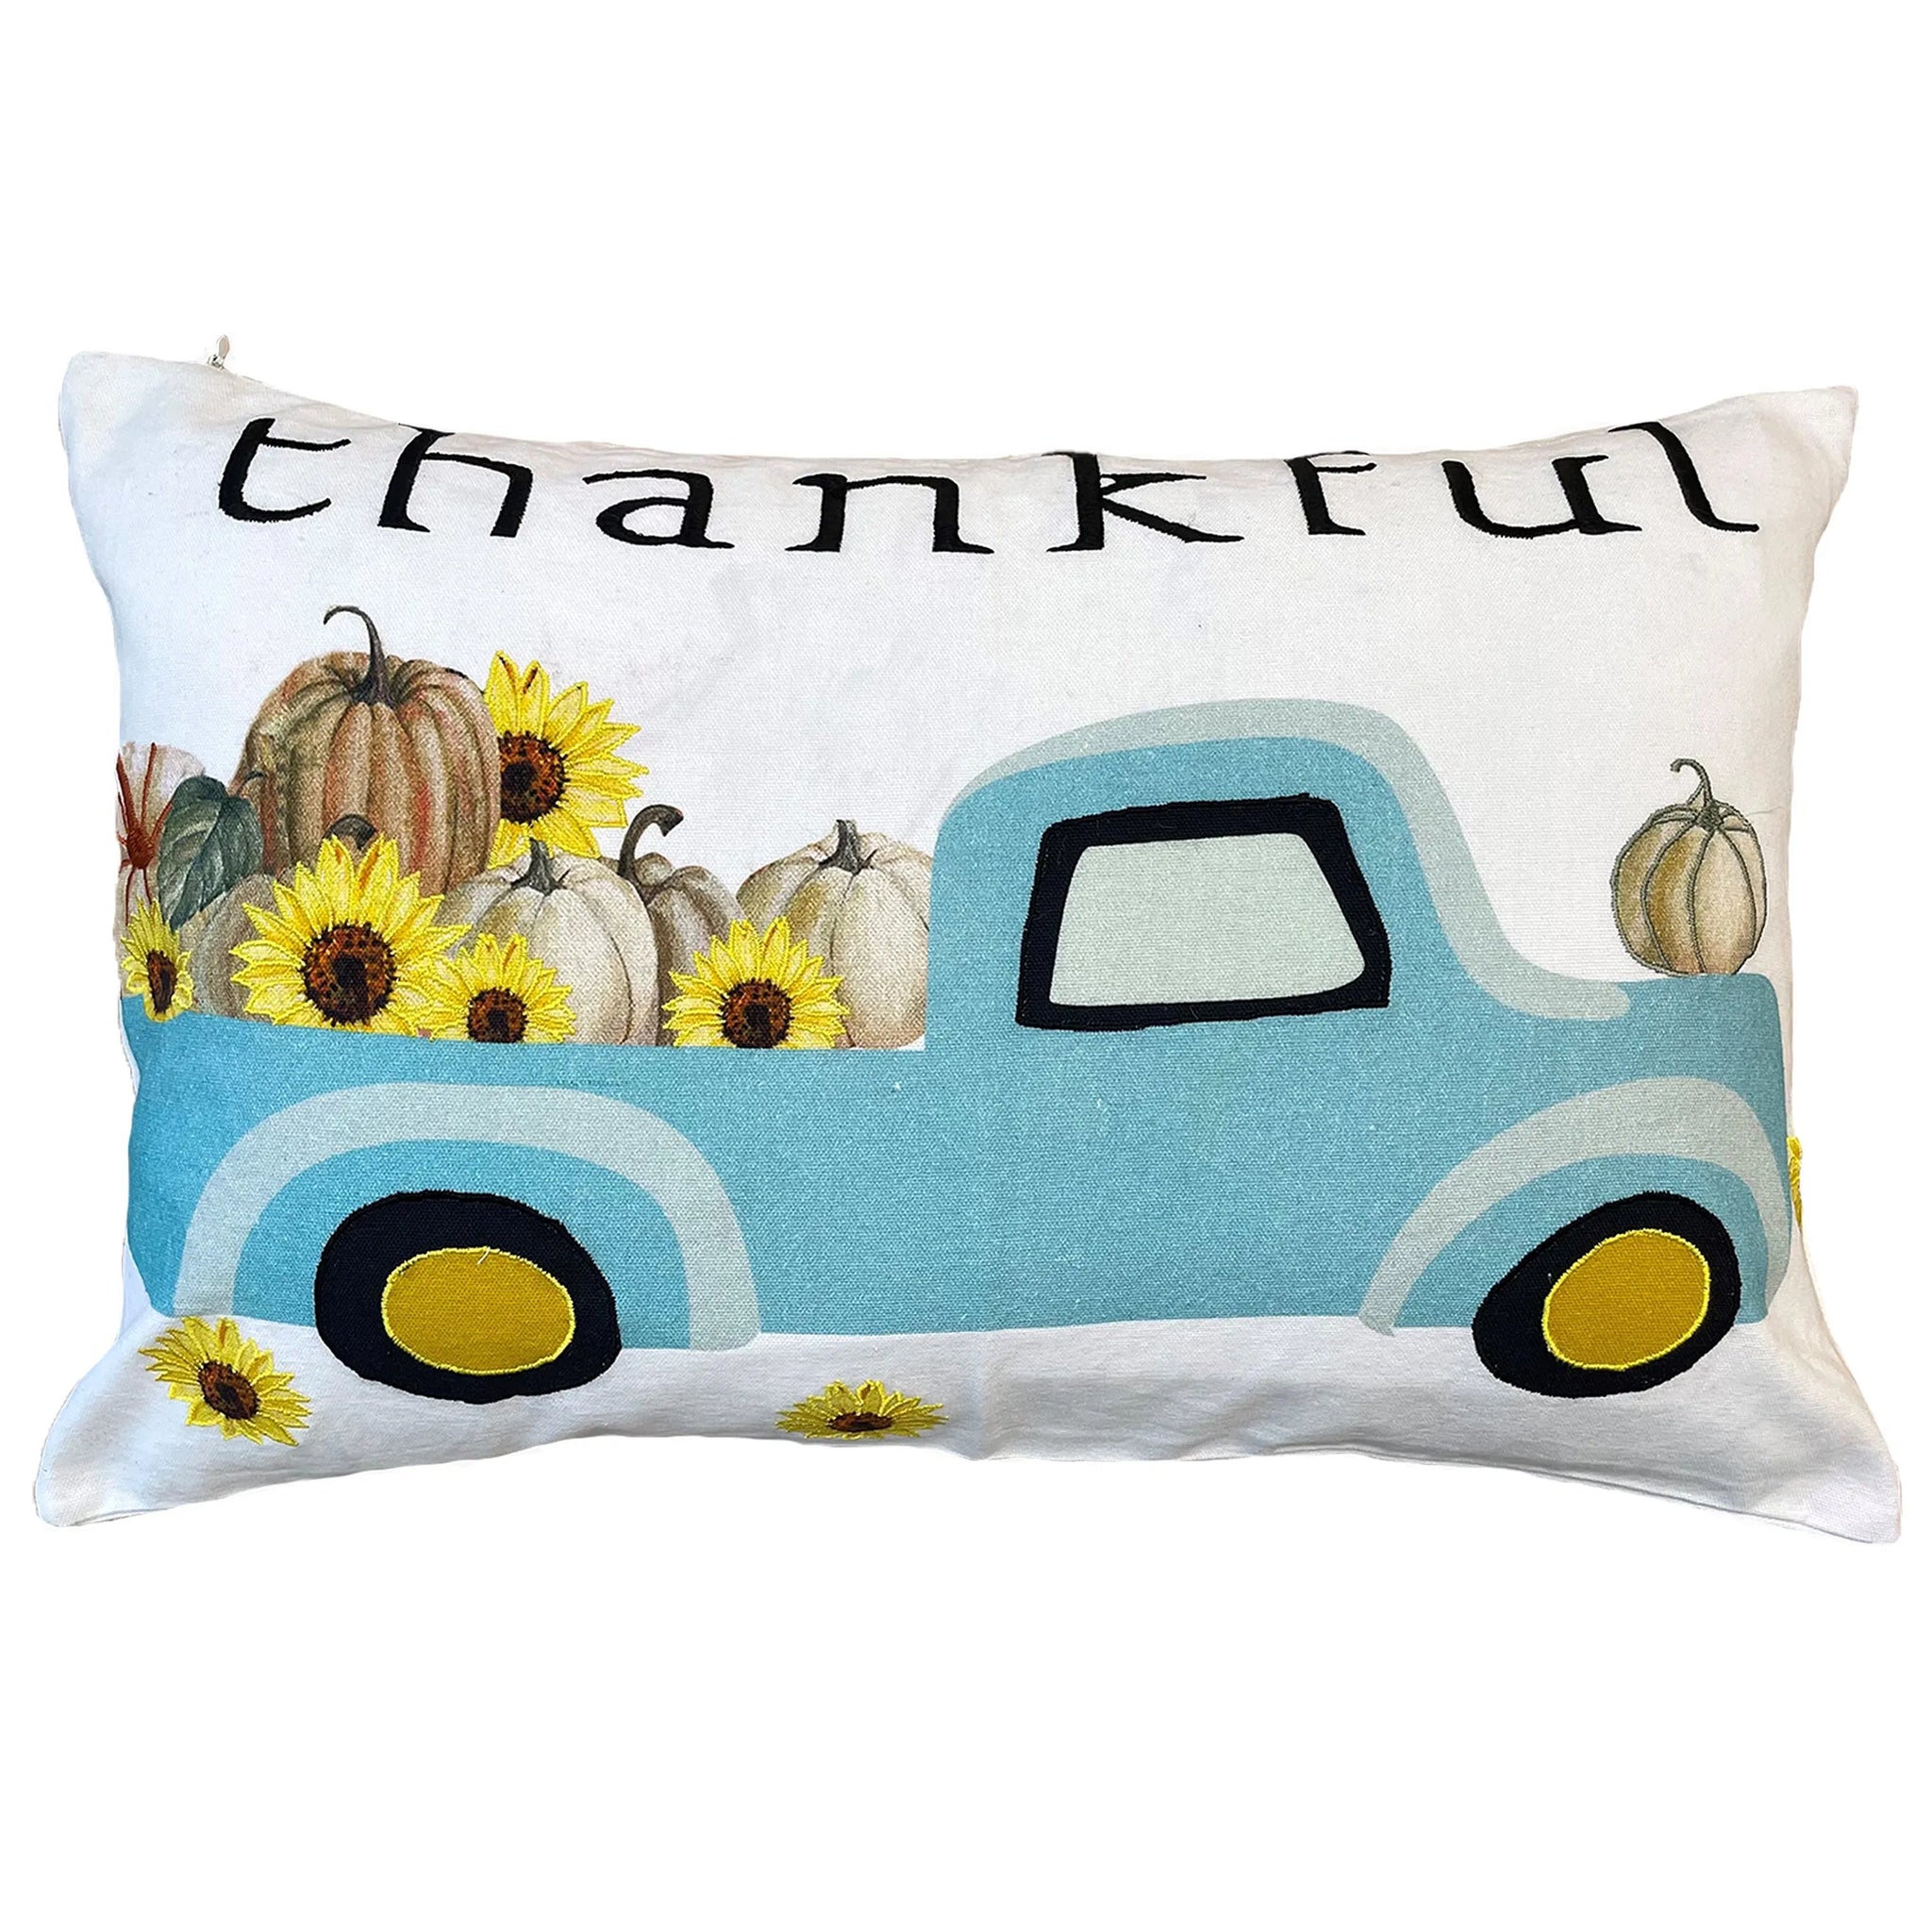 14"x22" Thankful Truck Embroidery Pillow home decor - Mod Lifestyles